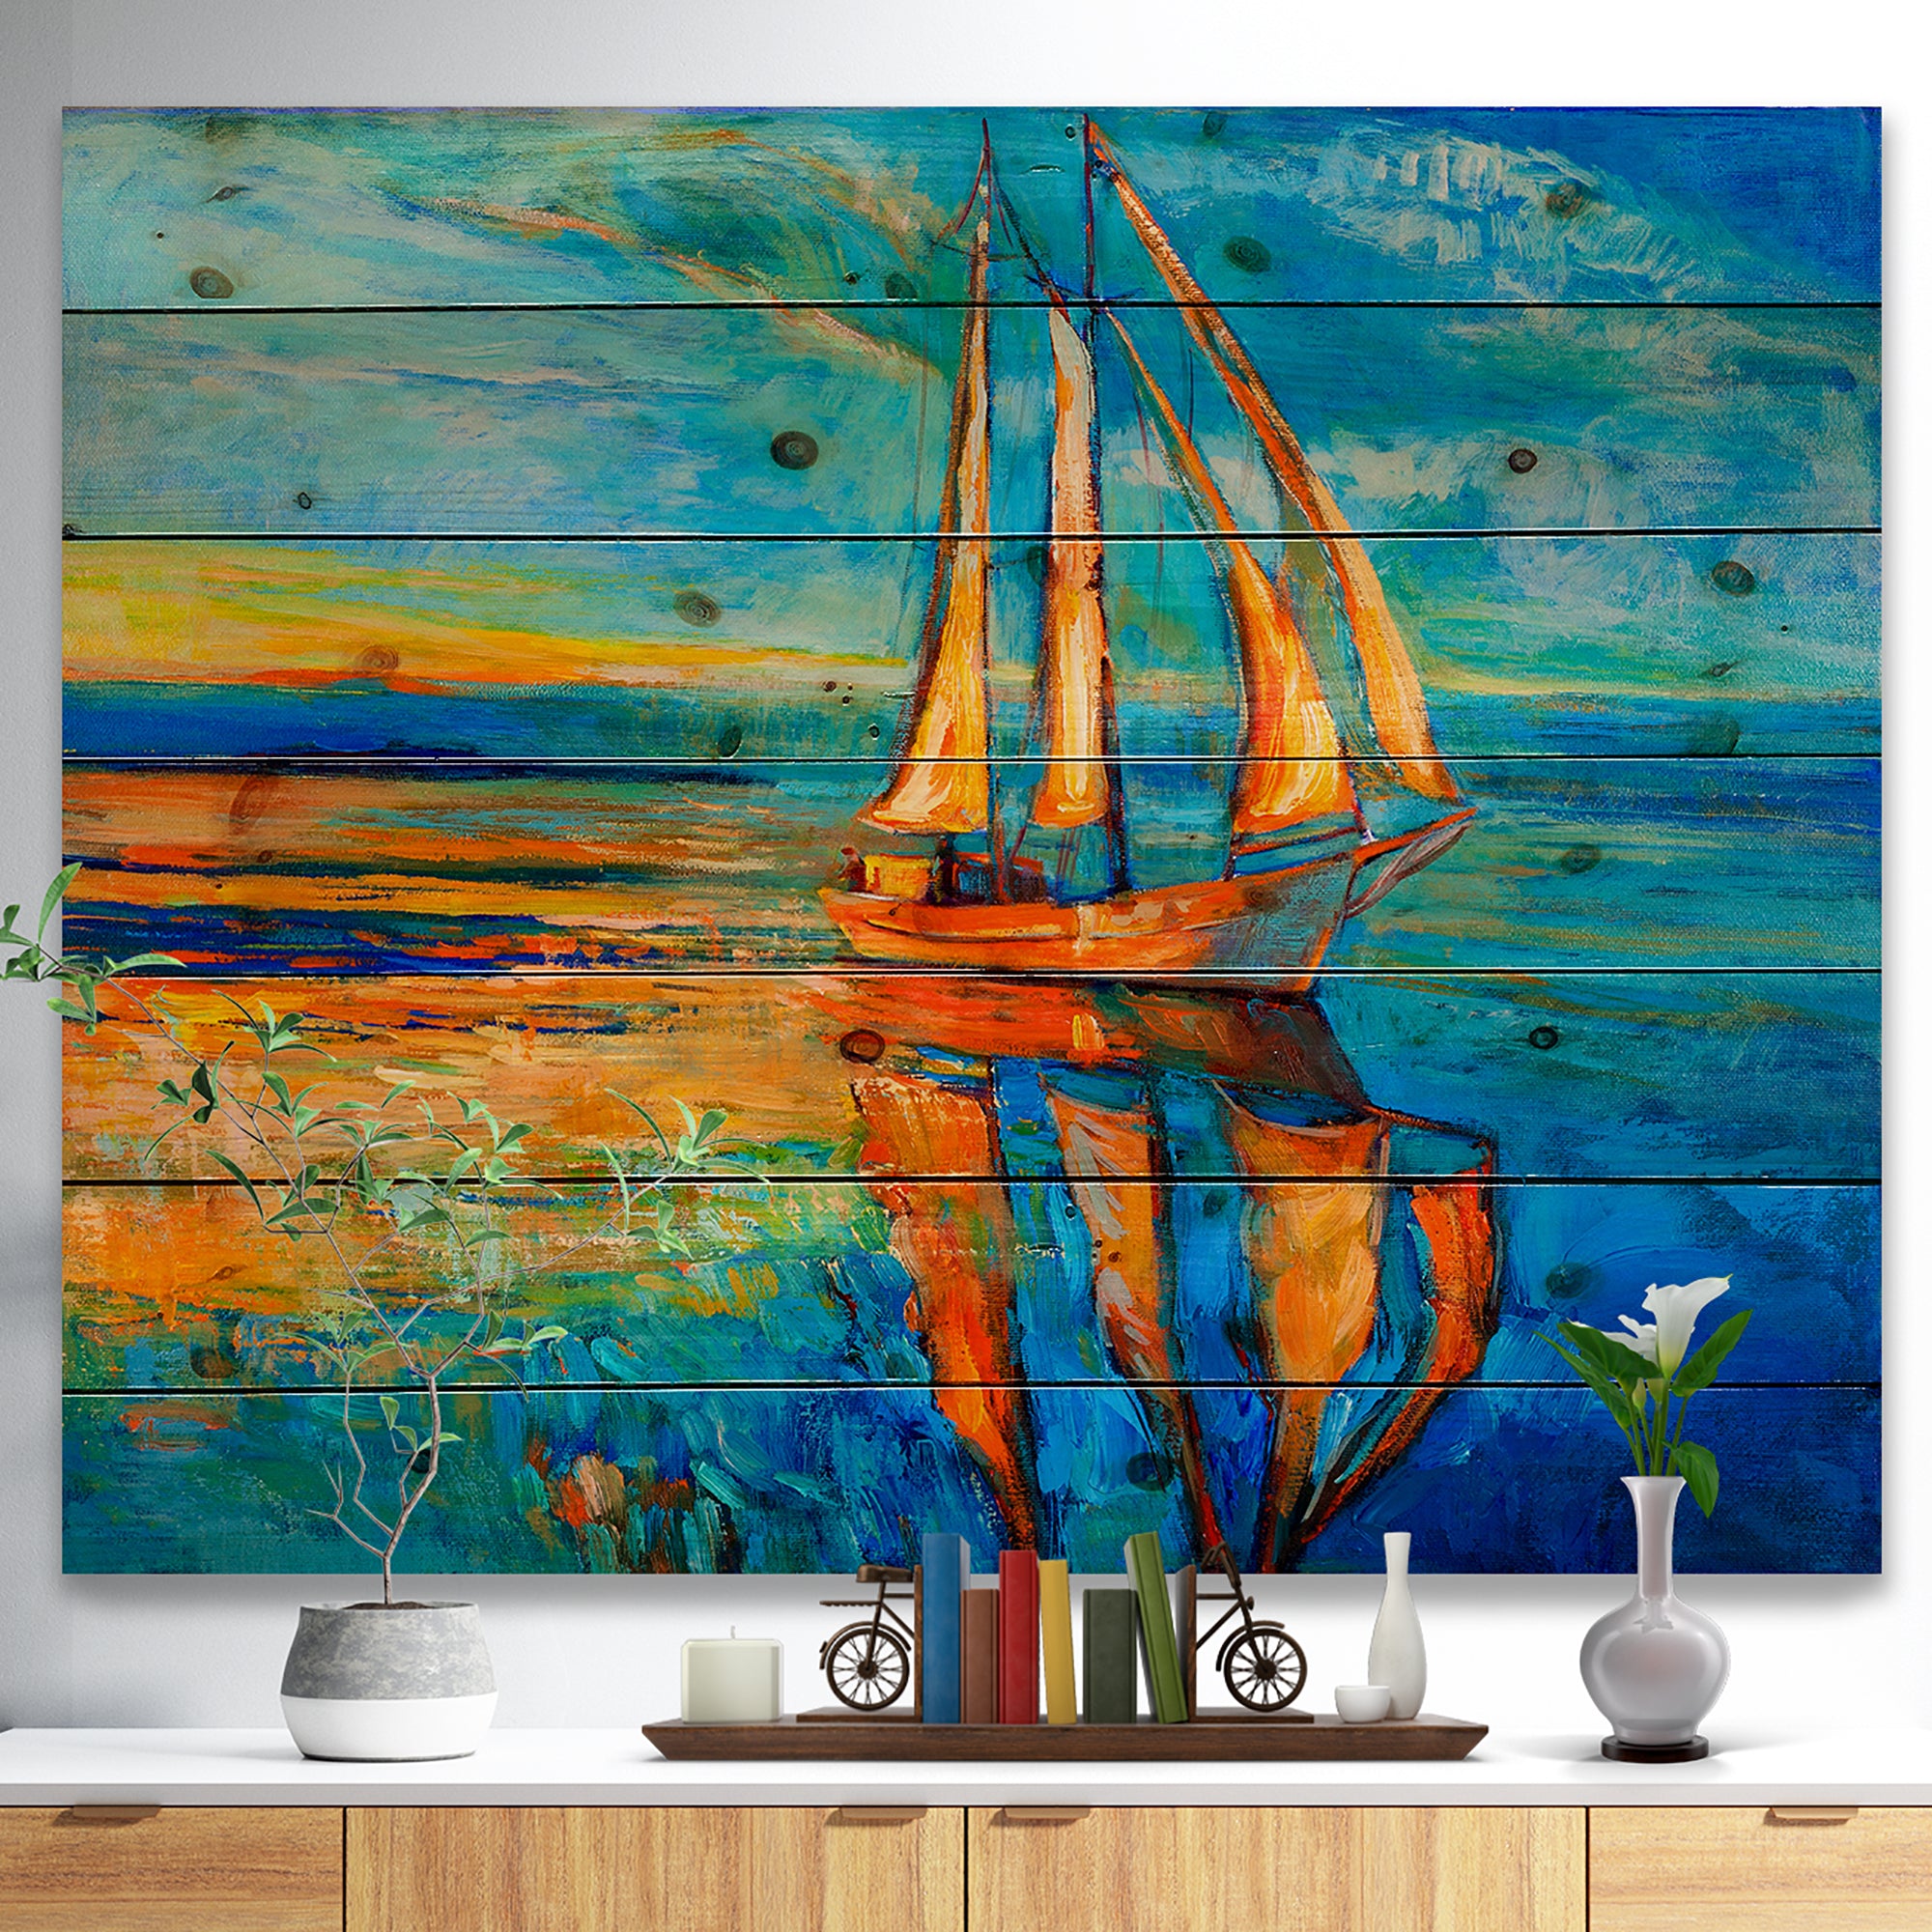 Sail Ship at Sunset in Blue Sky - Sea & Shore Painting Print on Natural Pine Wood - 20x15